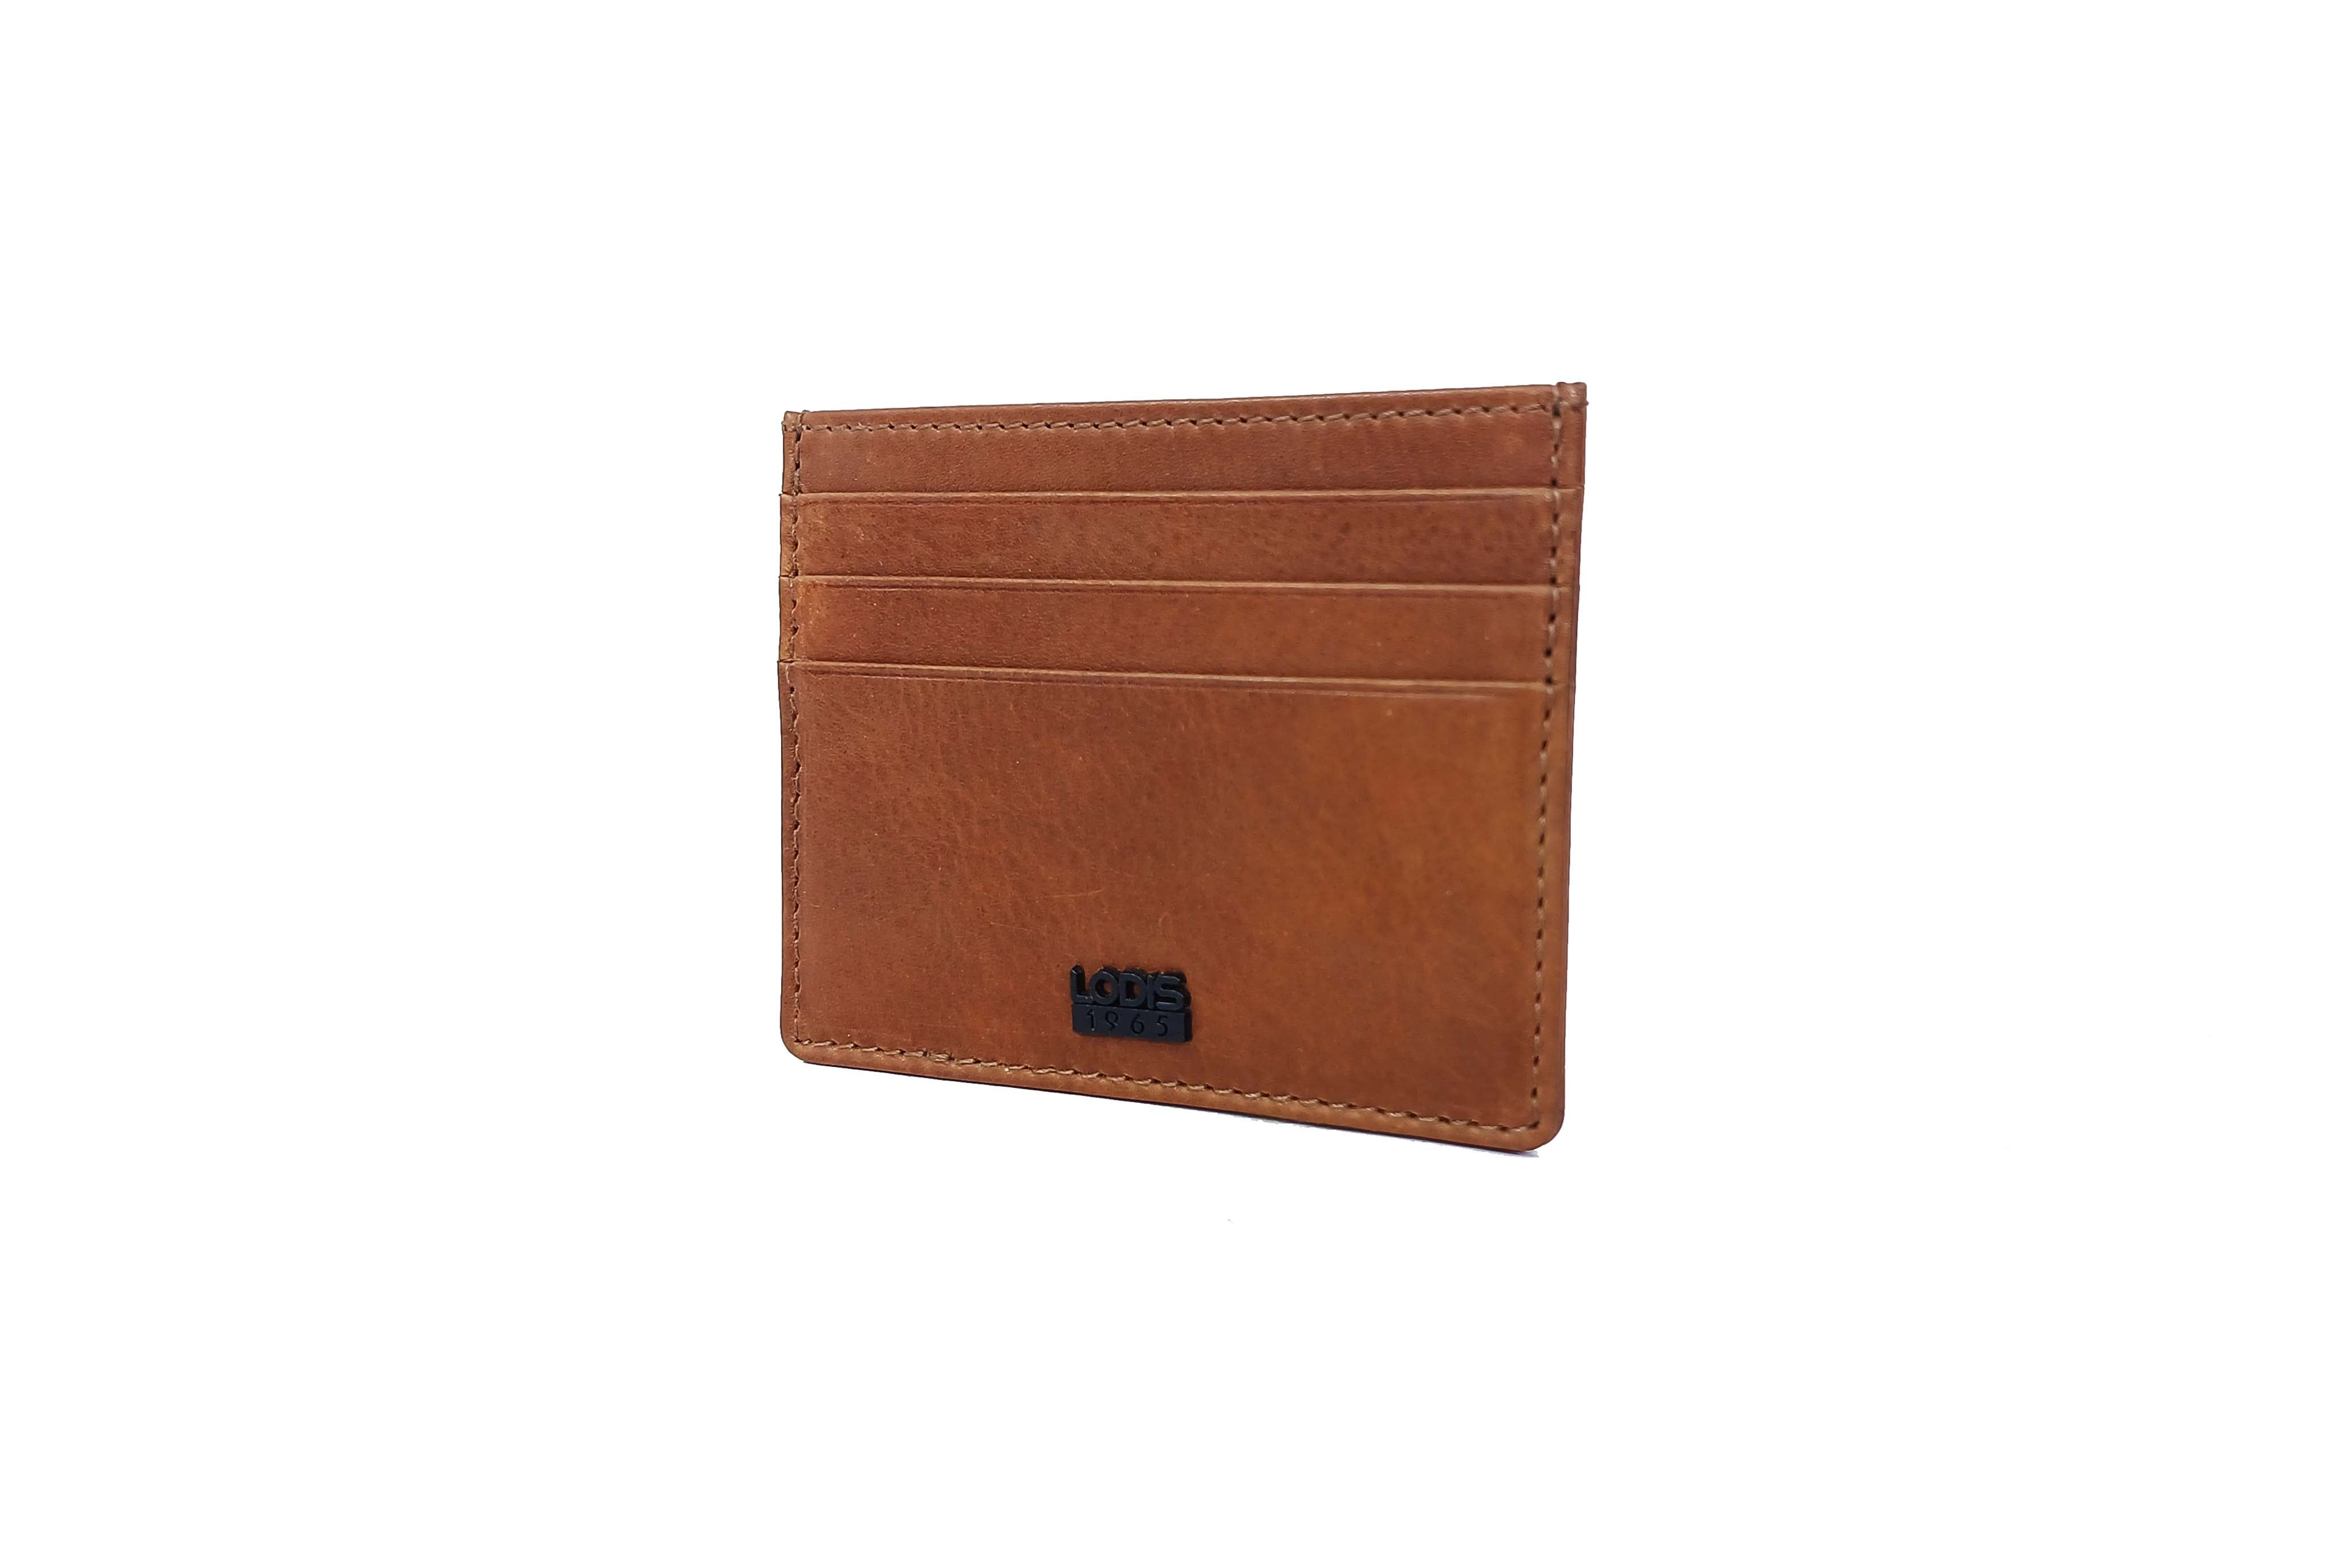 Buy Now The  Essentials with Stylish Men's Card Cases and Holders at Lodis